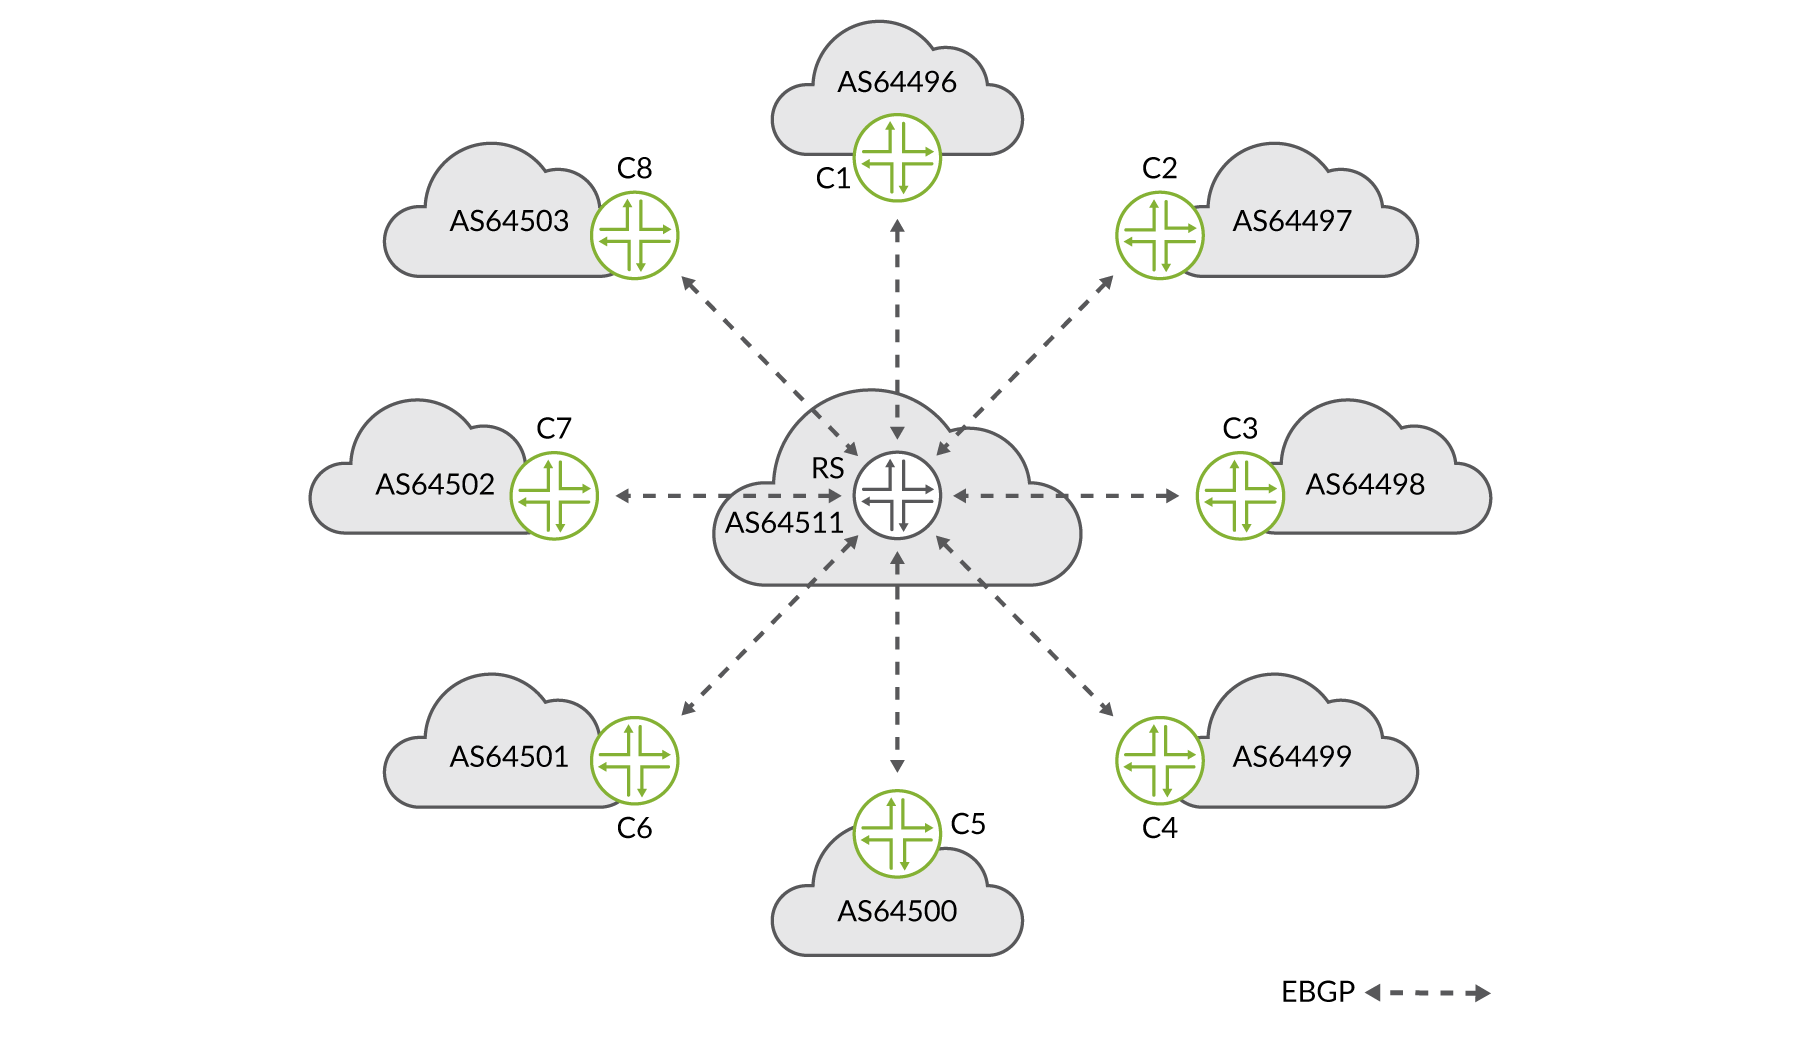 EBGP
at an IXP LAN with a Route Server